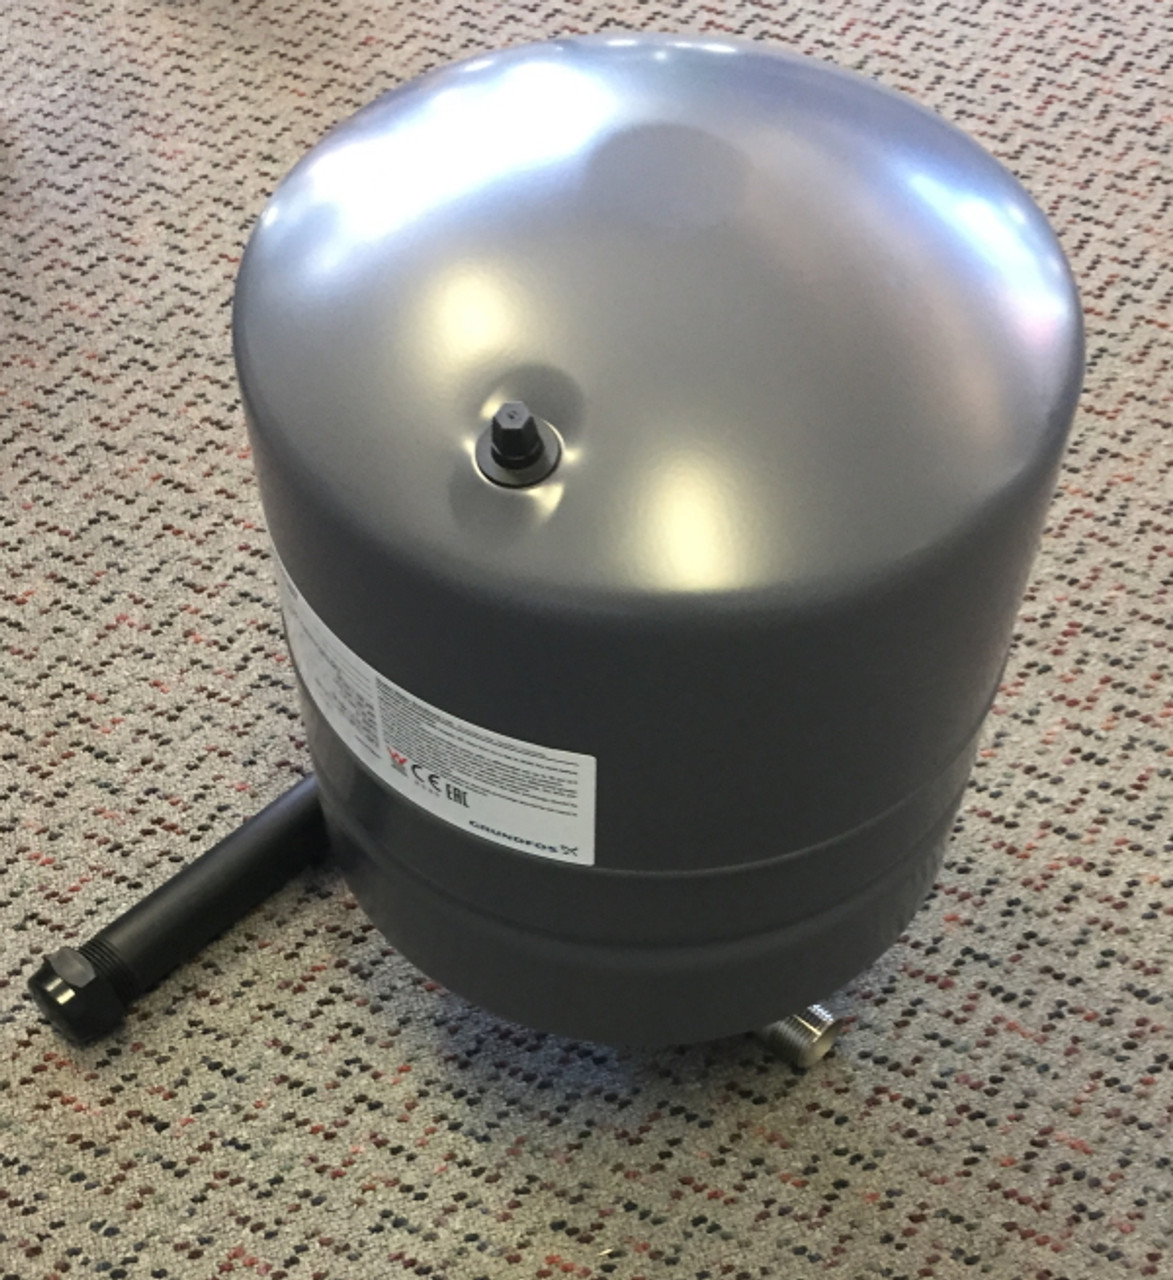 Pressure accunulator tank stand fitted with 18 litre pressure tank